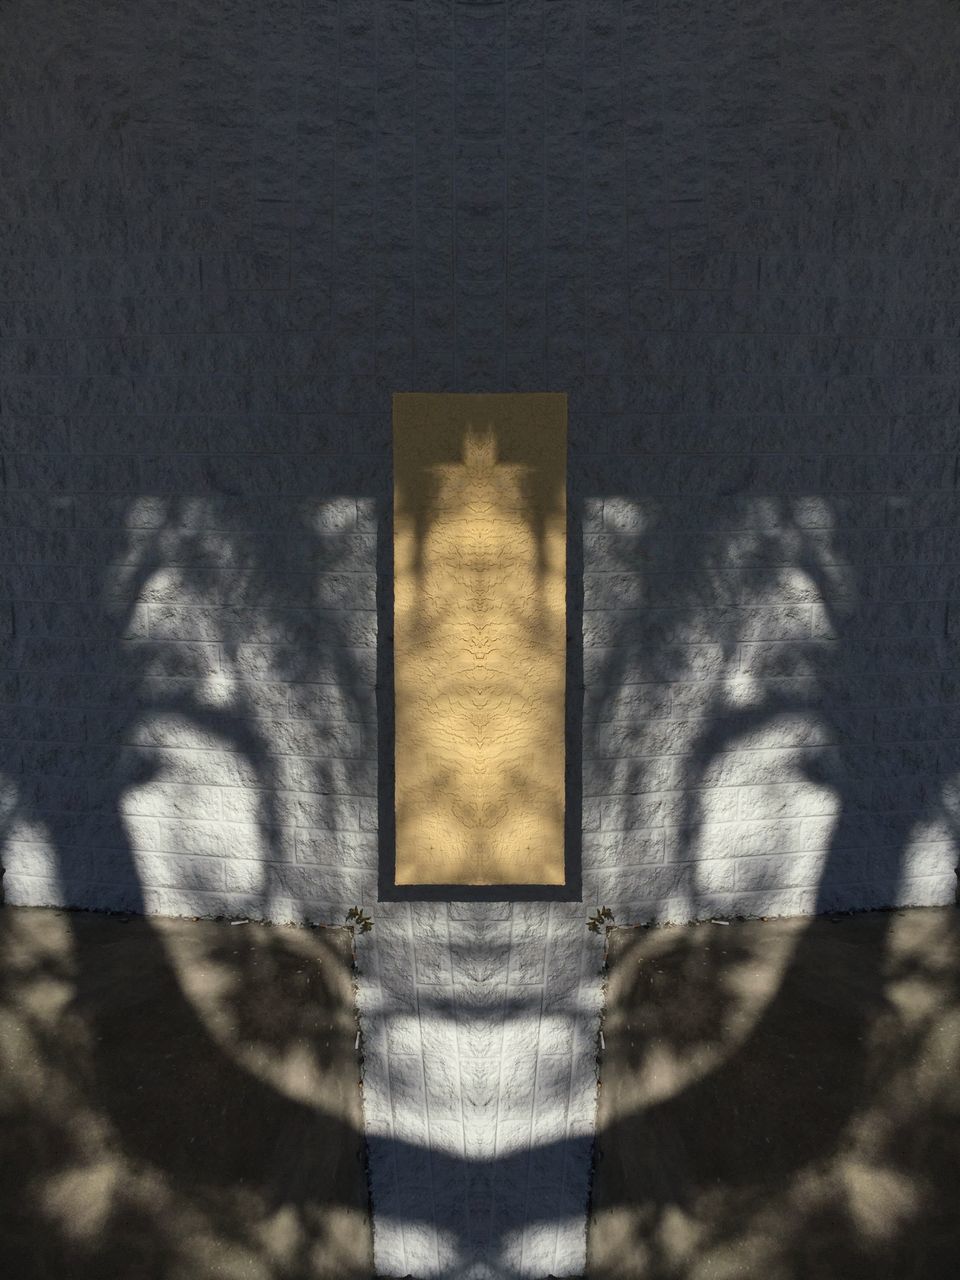 sunlight, shadow, no people, nature, architecture, built structure, day, outdoors, pattern, yellow, close-up, sky, building exterior, wall - building feature, art and craft, digital composite, sunset, shape, geometric shape, metal, focus on shadow